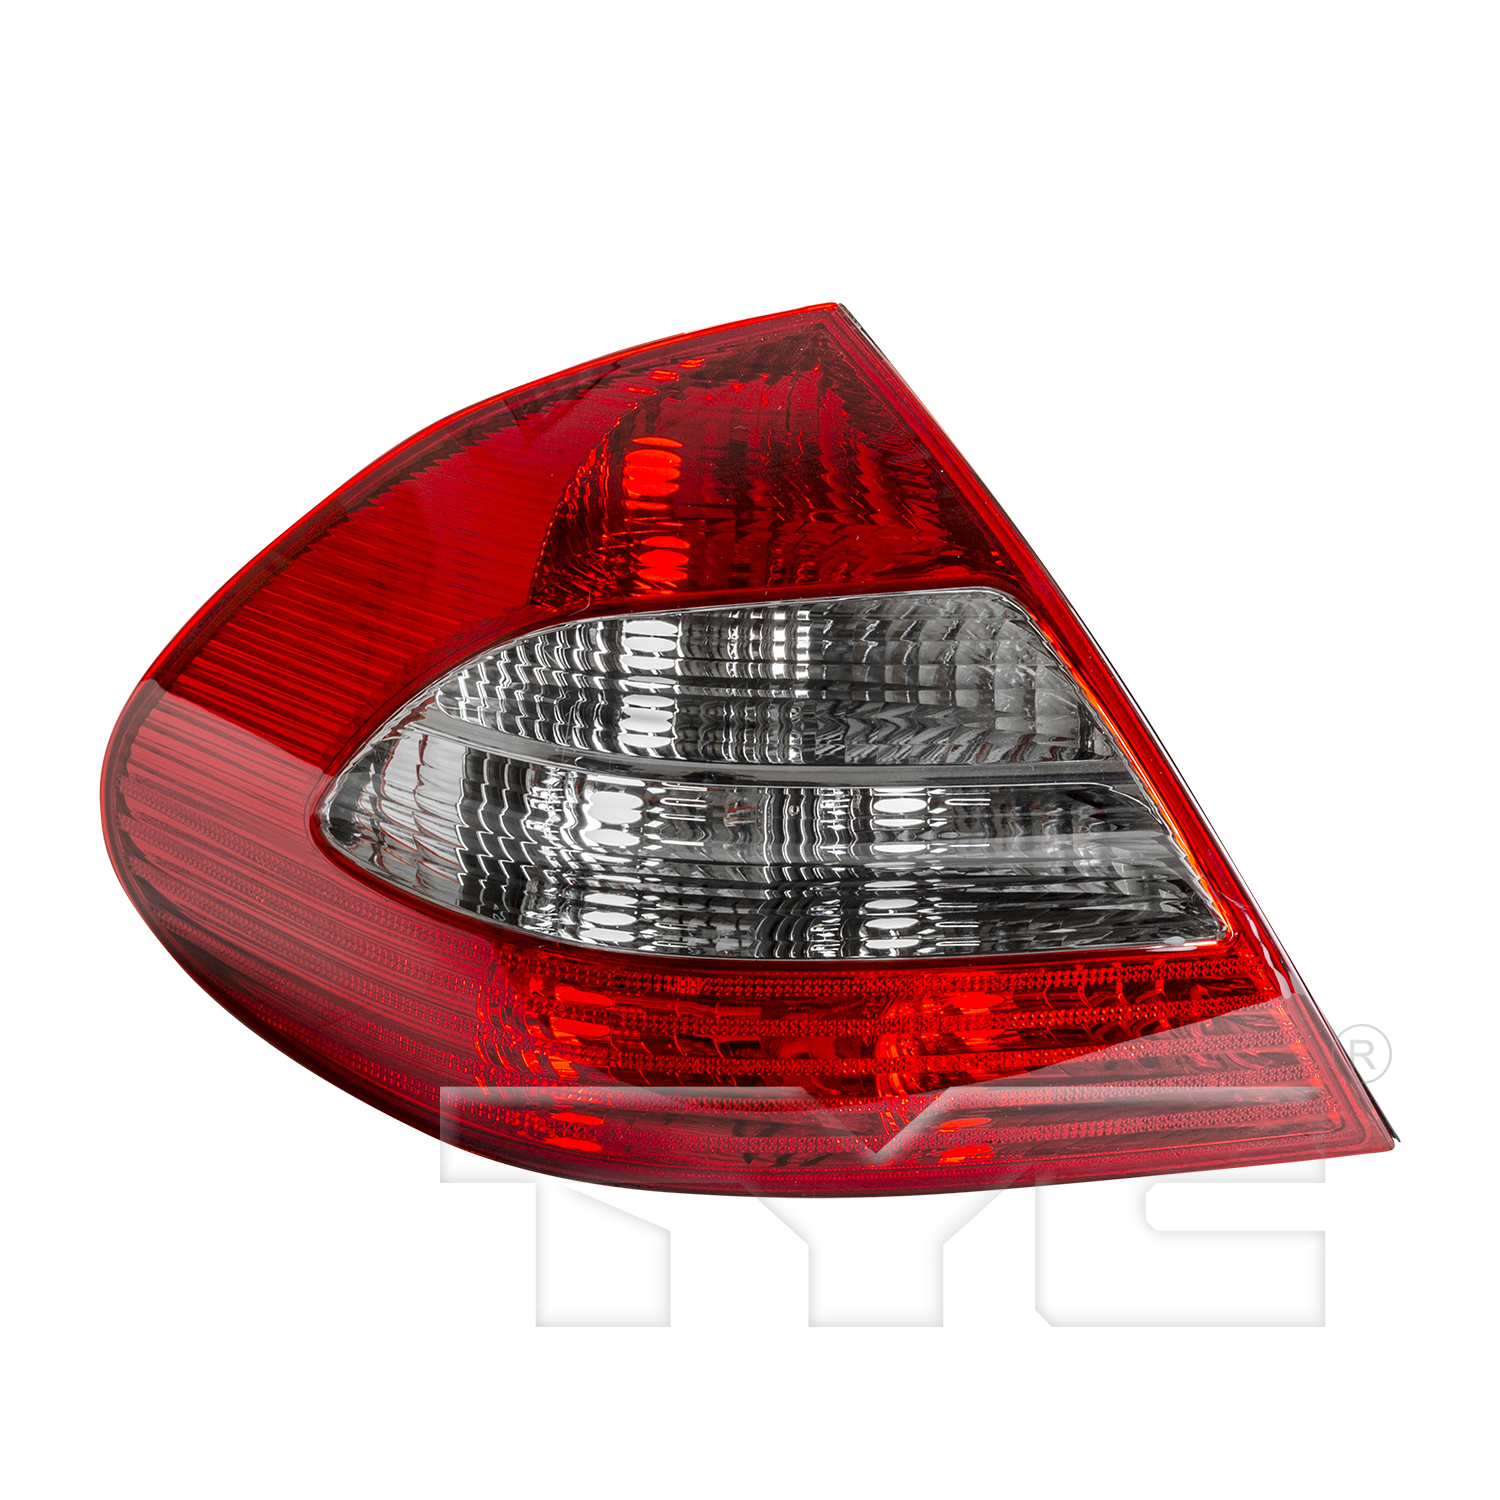 Aftermarket TAILLIGHTS for MERCEDES-BENZ - E550, E550,07-09,LT Taillamp assy